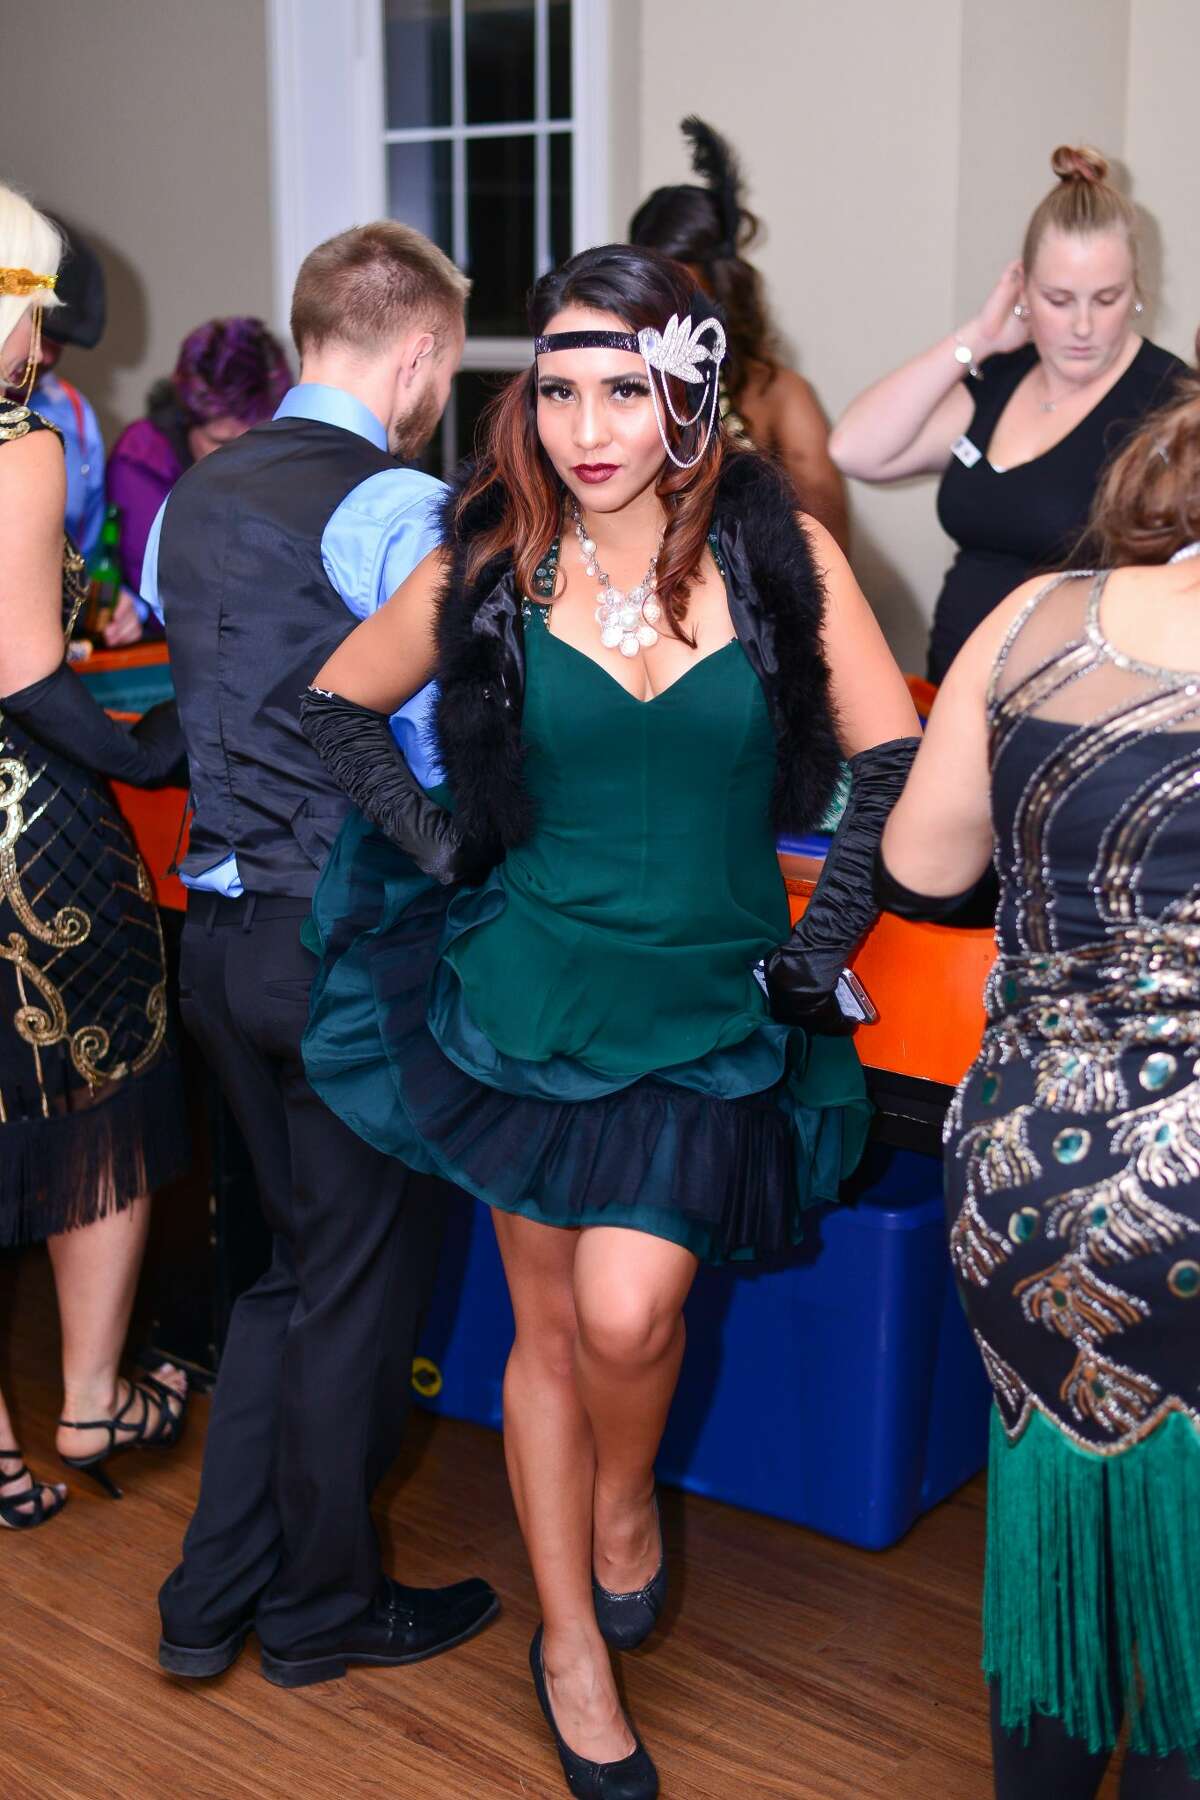 The Étonnant Fleur's Great Gatsby Roaring '20s party Friday night, Jan. 20, 2018, helped raise money to benefit area women veterans while flaunting a bit of ritzy style.